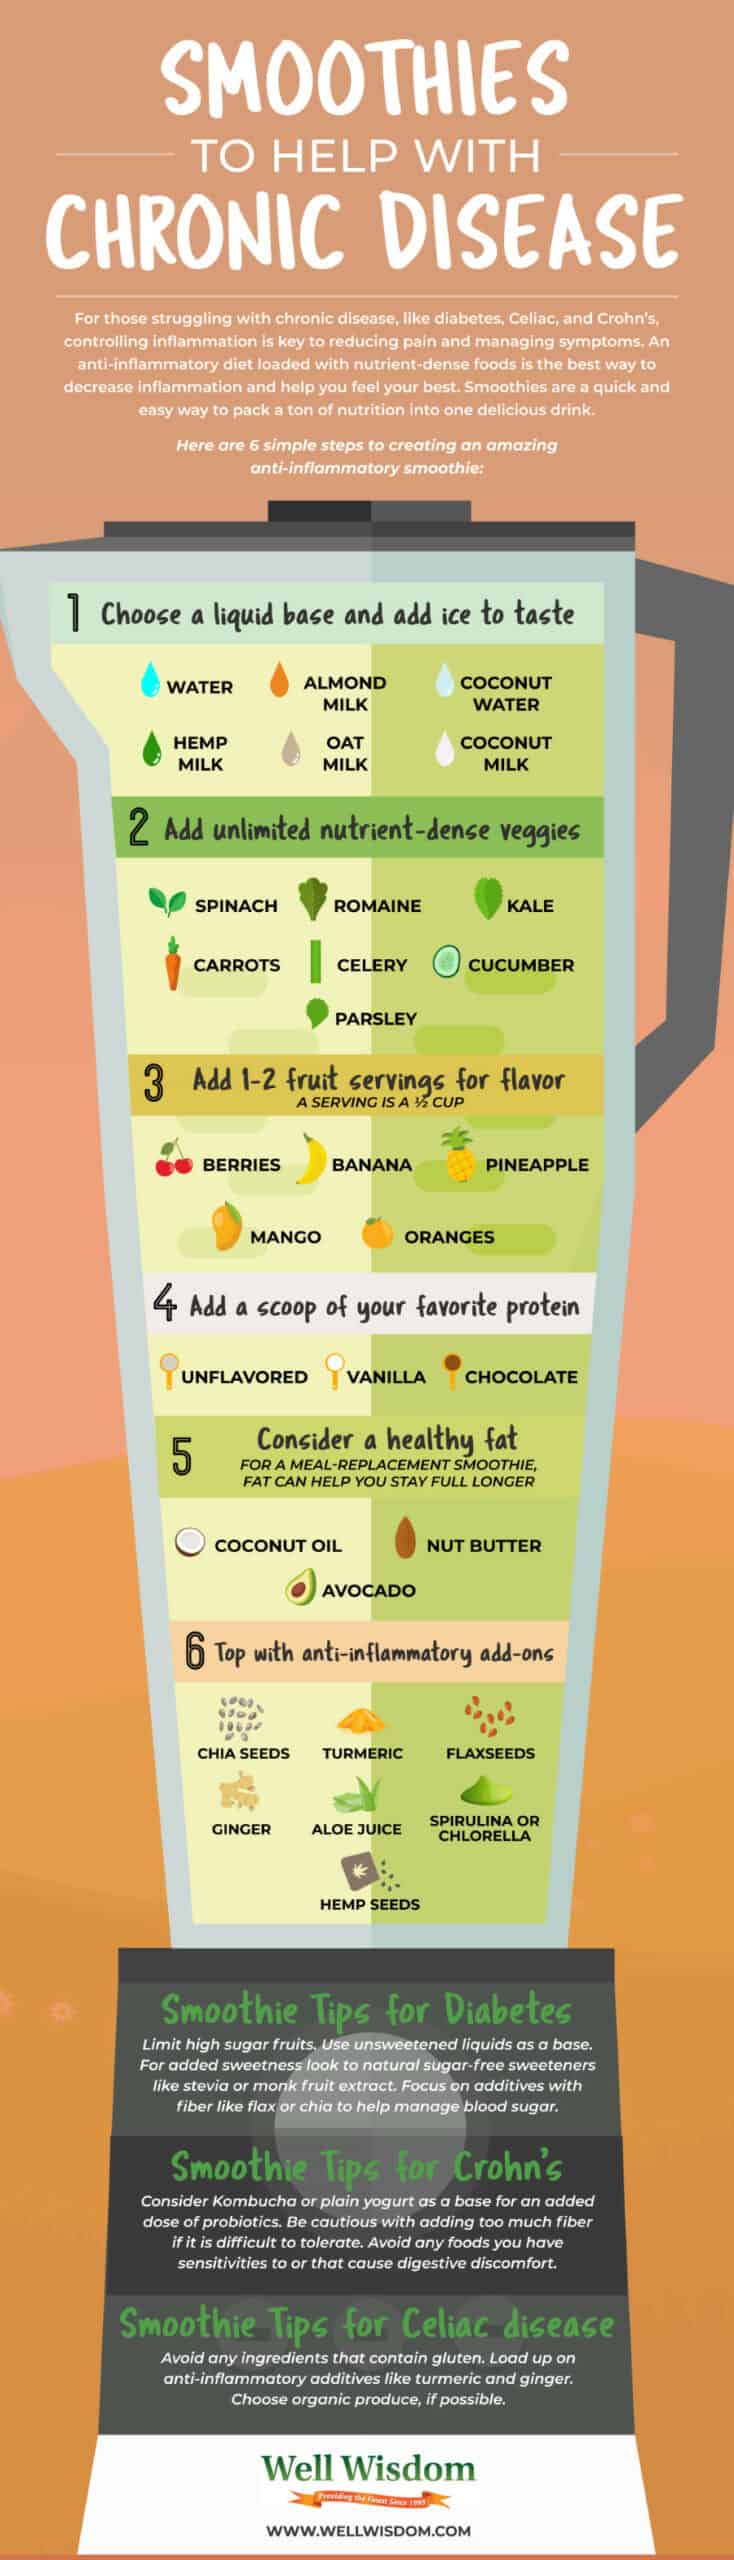 Smoothies to Help with Chronic Disease